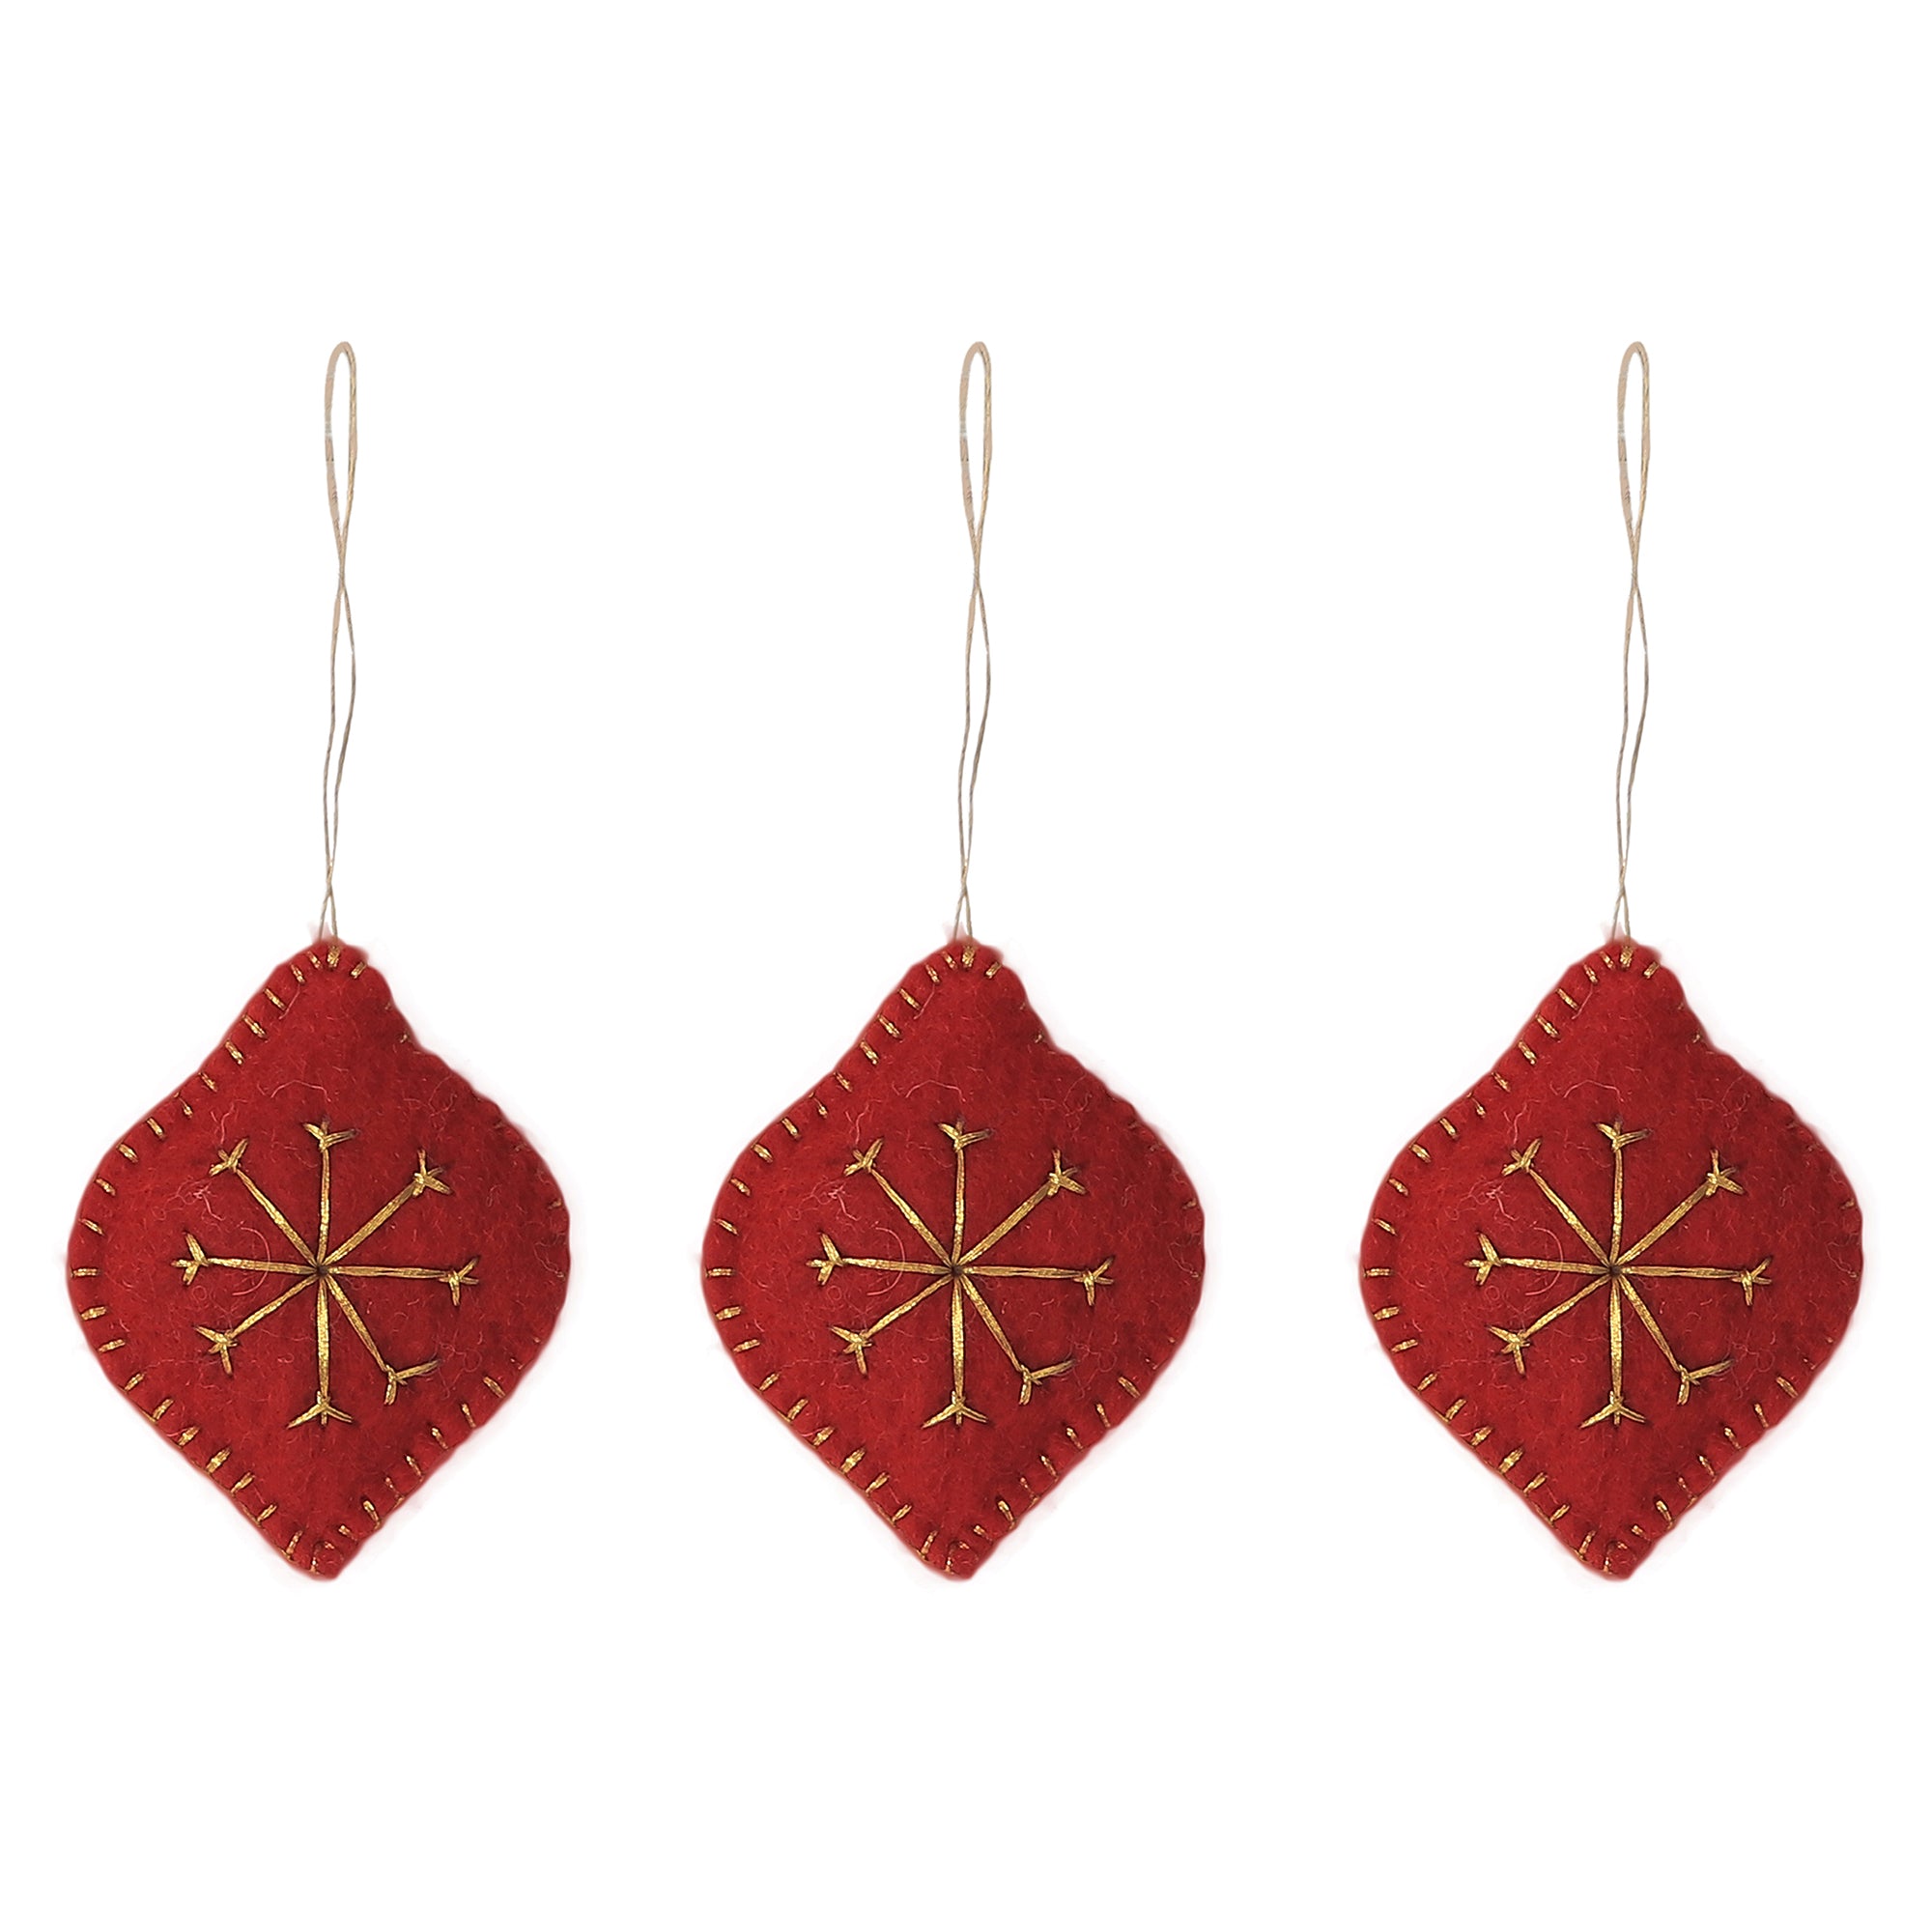 Oval Hearts (Set Of 3) Hanging Ornament